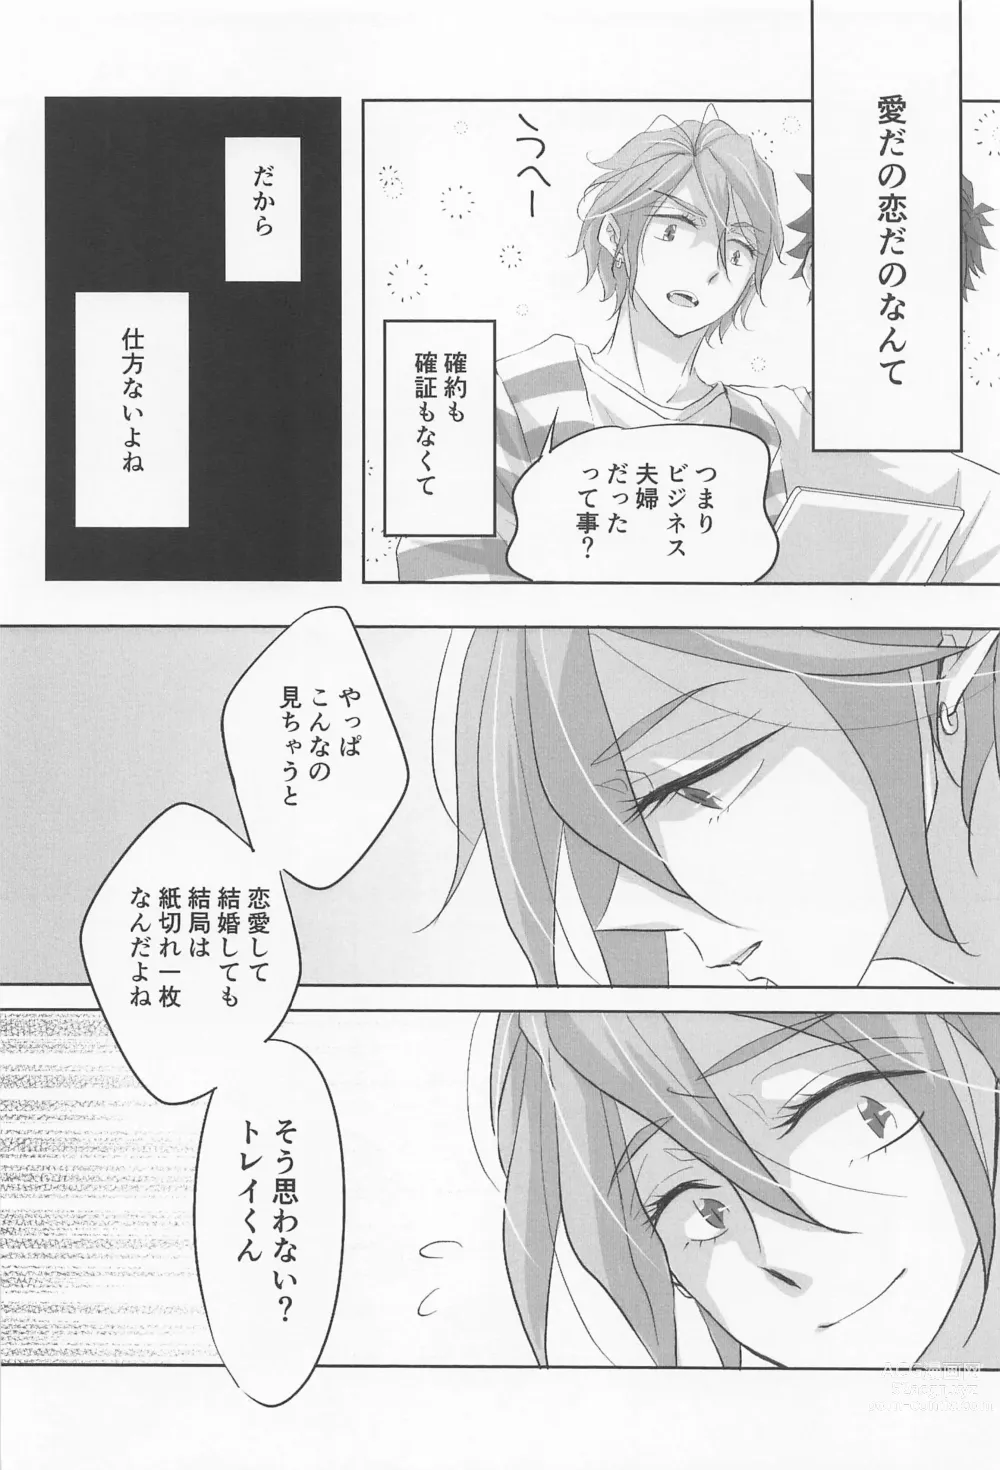 Page 5 of doujinshi My heart dedicated to you